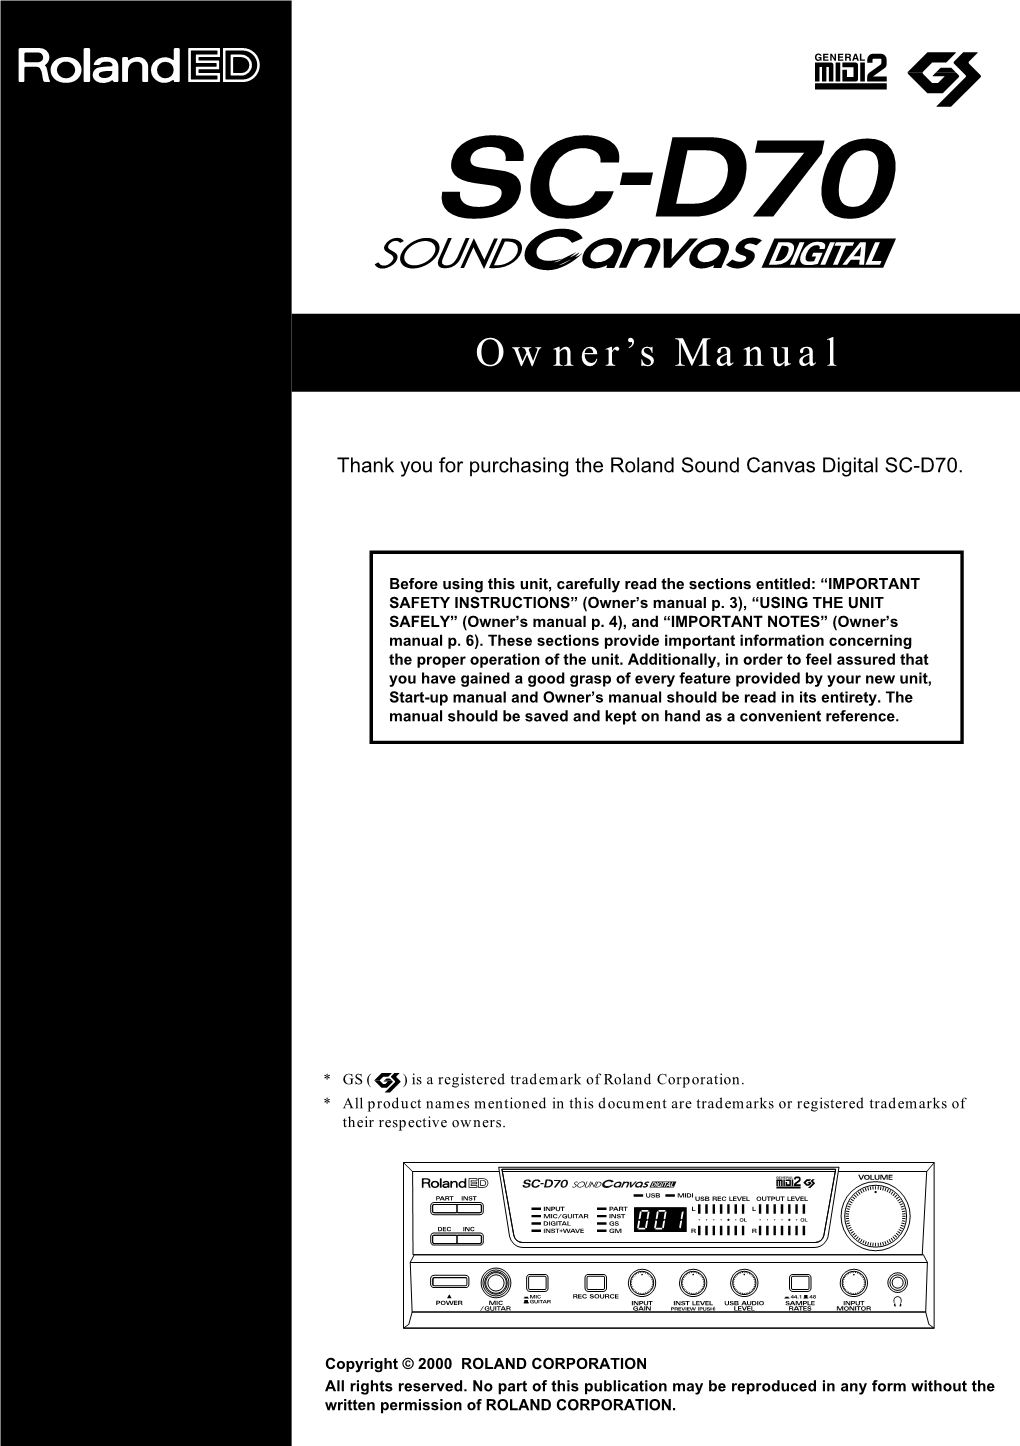 Owner's Manual of the Software You Are Using